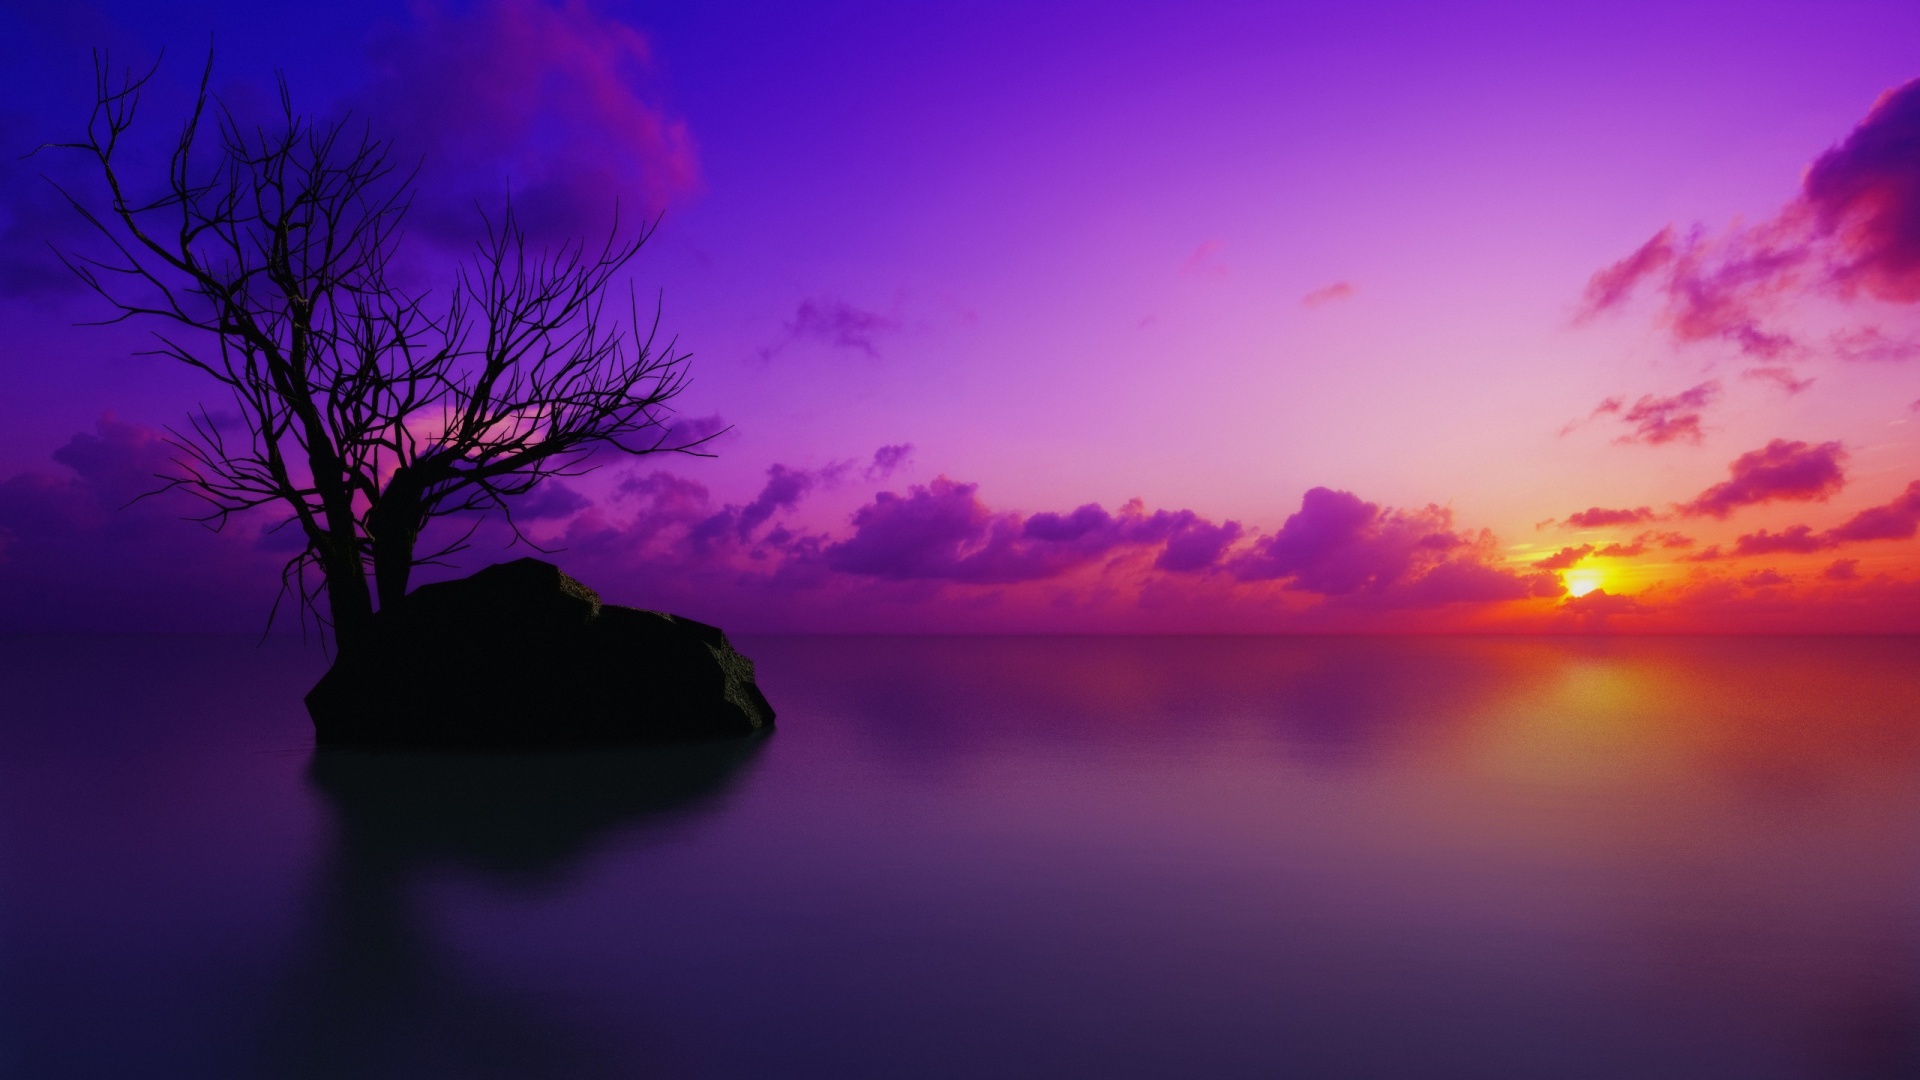 Violet   Wallpaper High Definition High Quality Widescreen